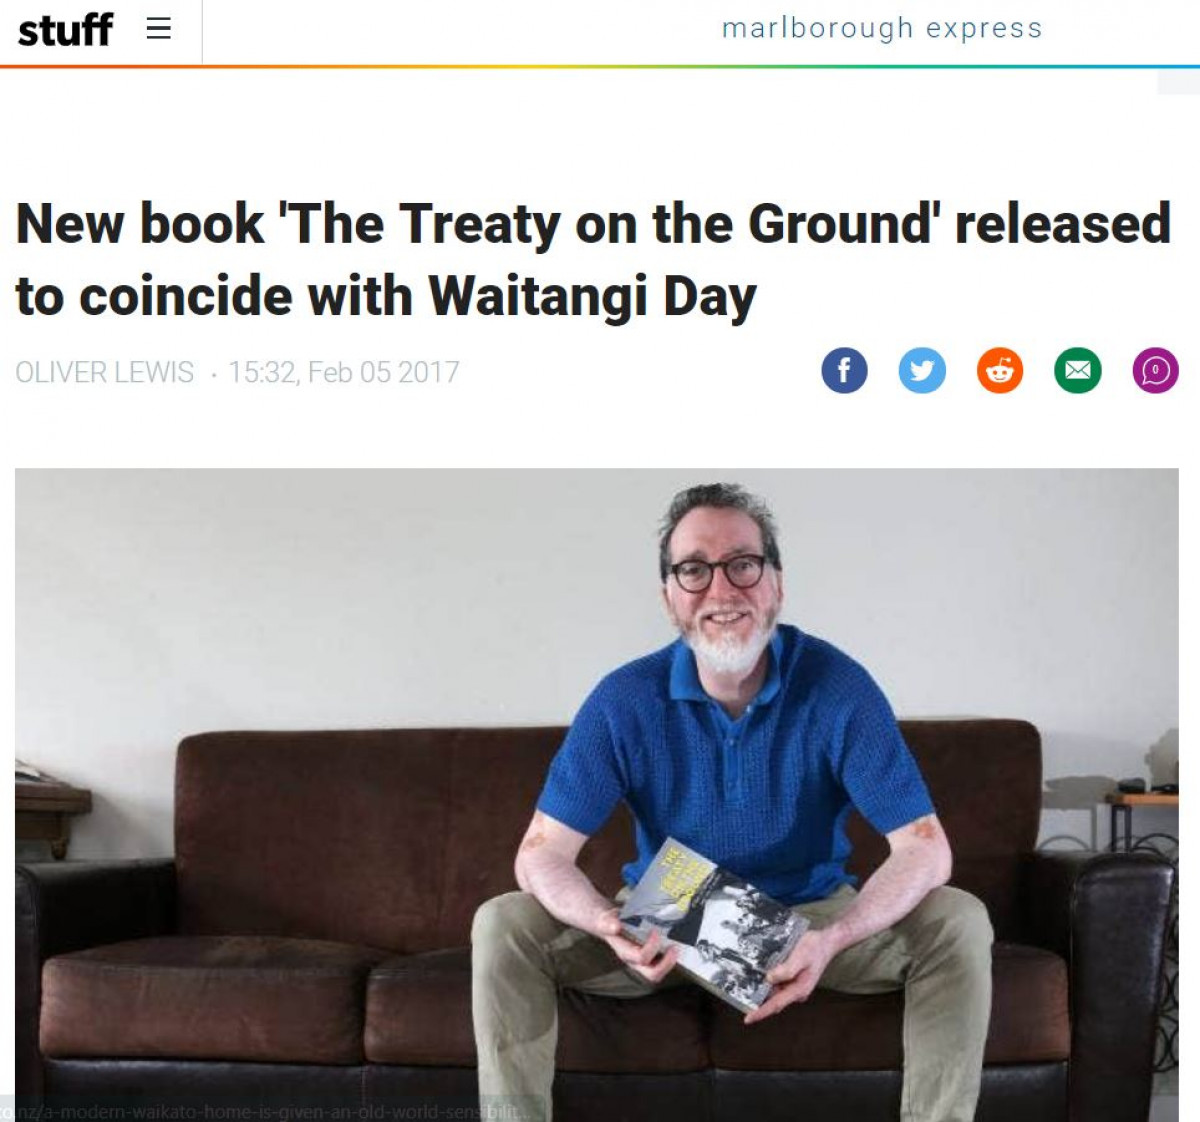 New book 'The Treaty on the Ground' released to coincide with Waitangi Day